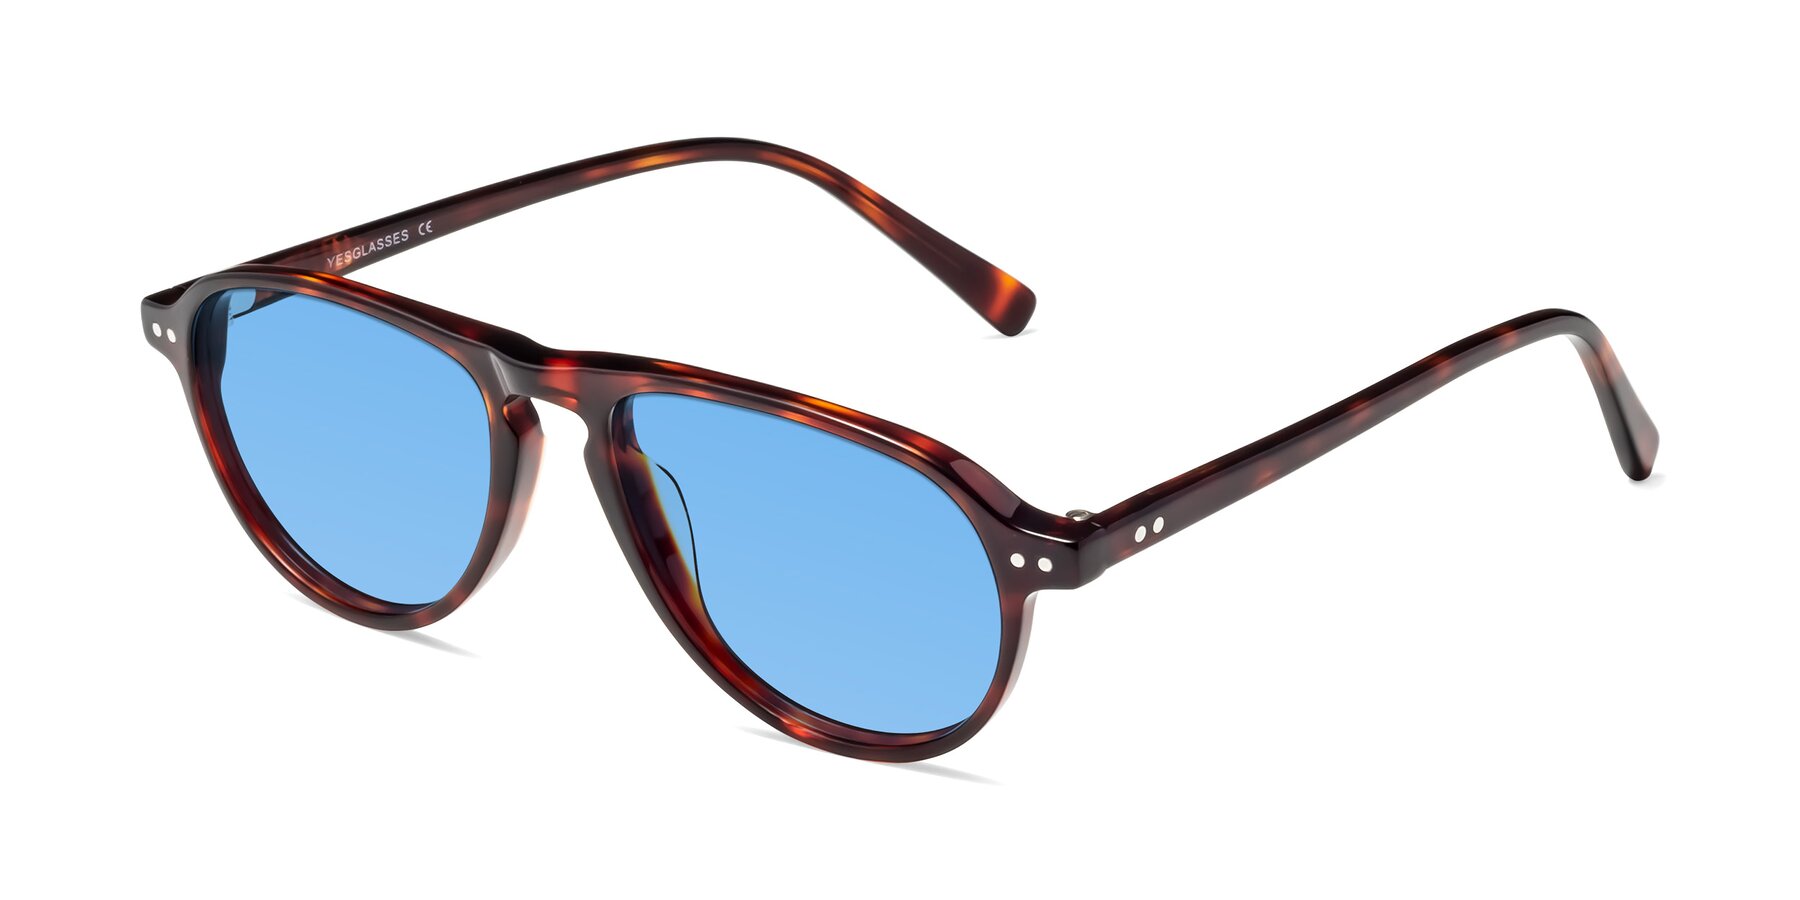 Angle of 17544 in Burgundy Tortoise with Medium Blue Tinted Lenses